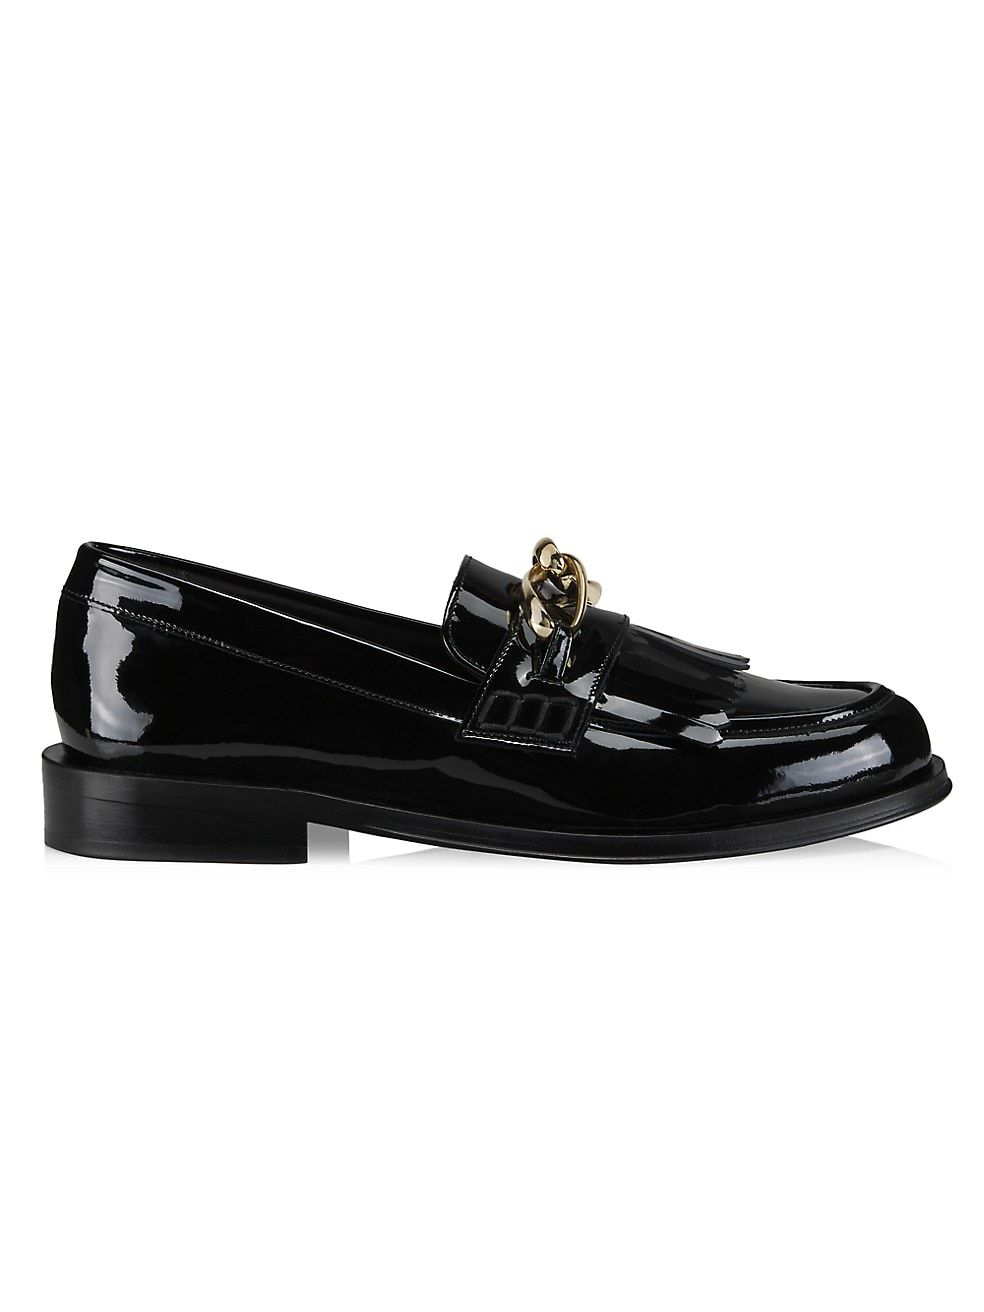 Frame Le Ayana Frill Patent Leather Loafers | Saks Fifth Avenue